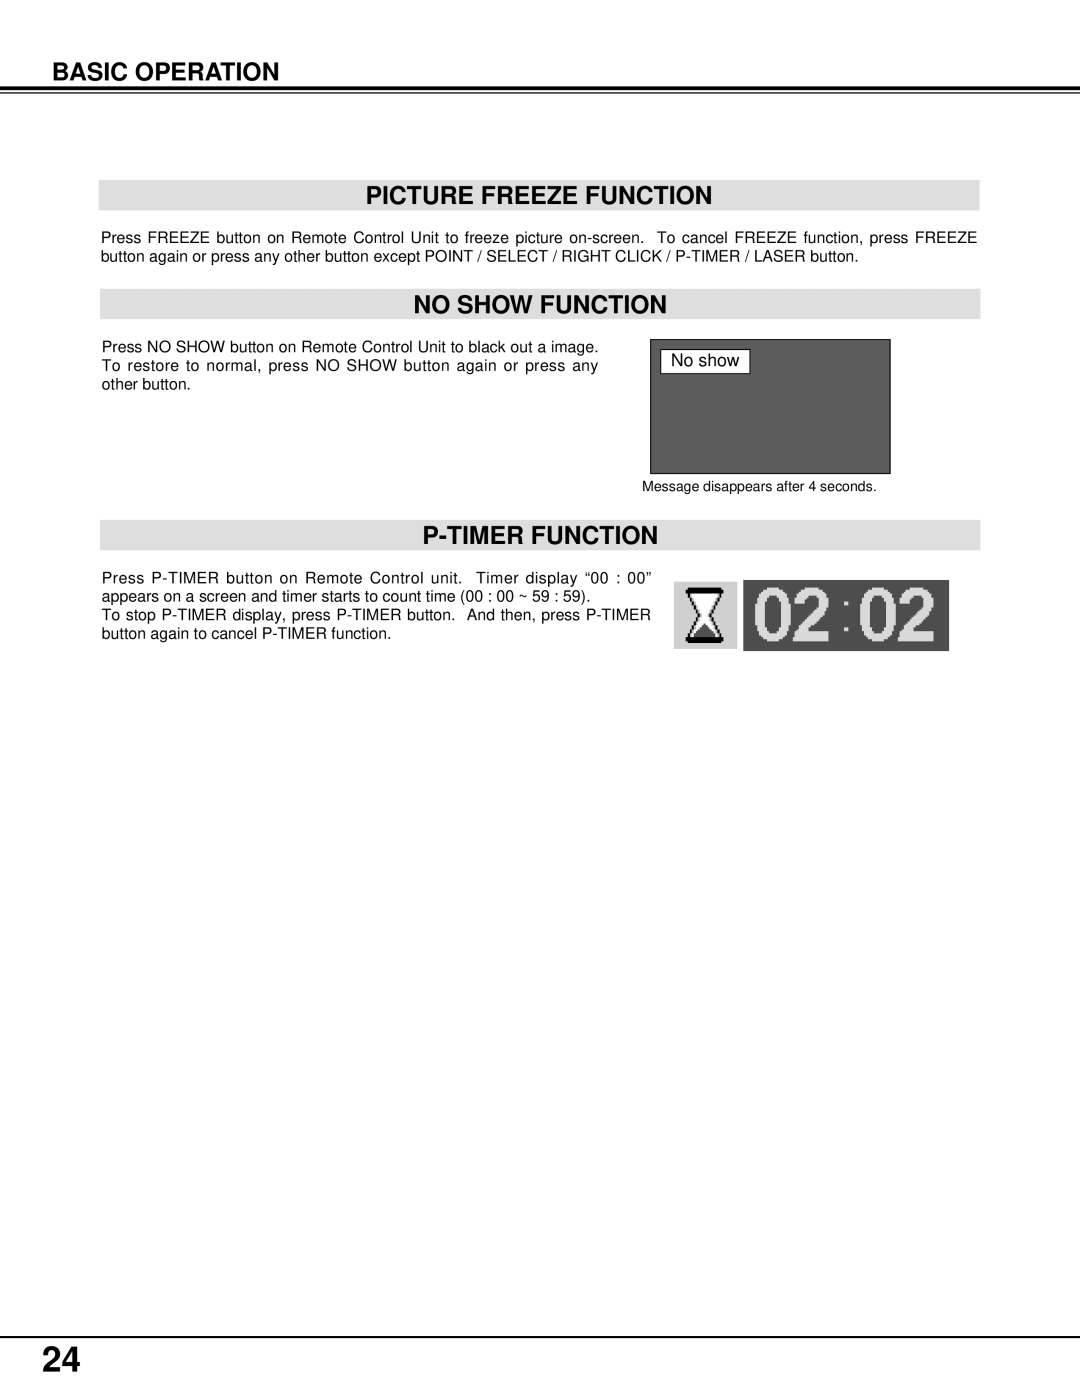 Eiki LC-UXT1 instruction manual Basic Operation Picture Freeze Function, No Show Function, P-Timer Function, No show 